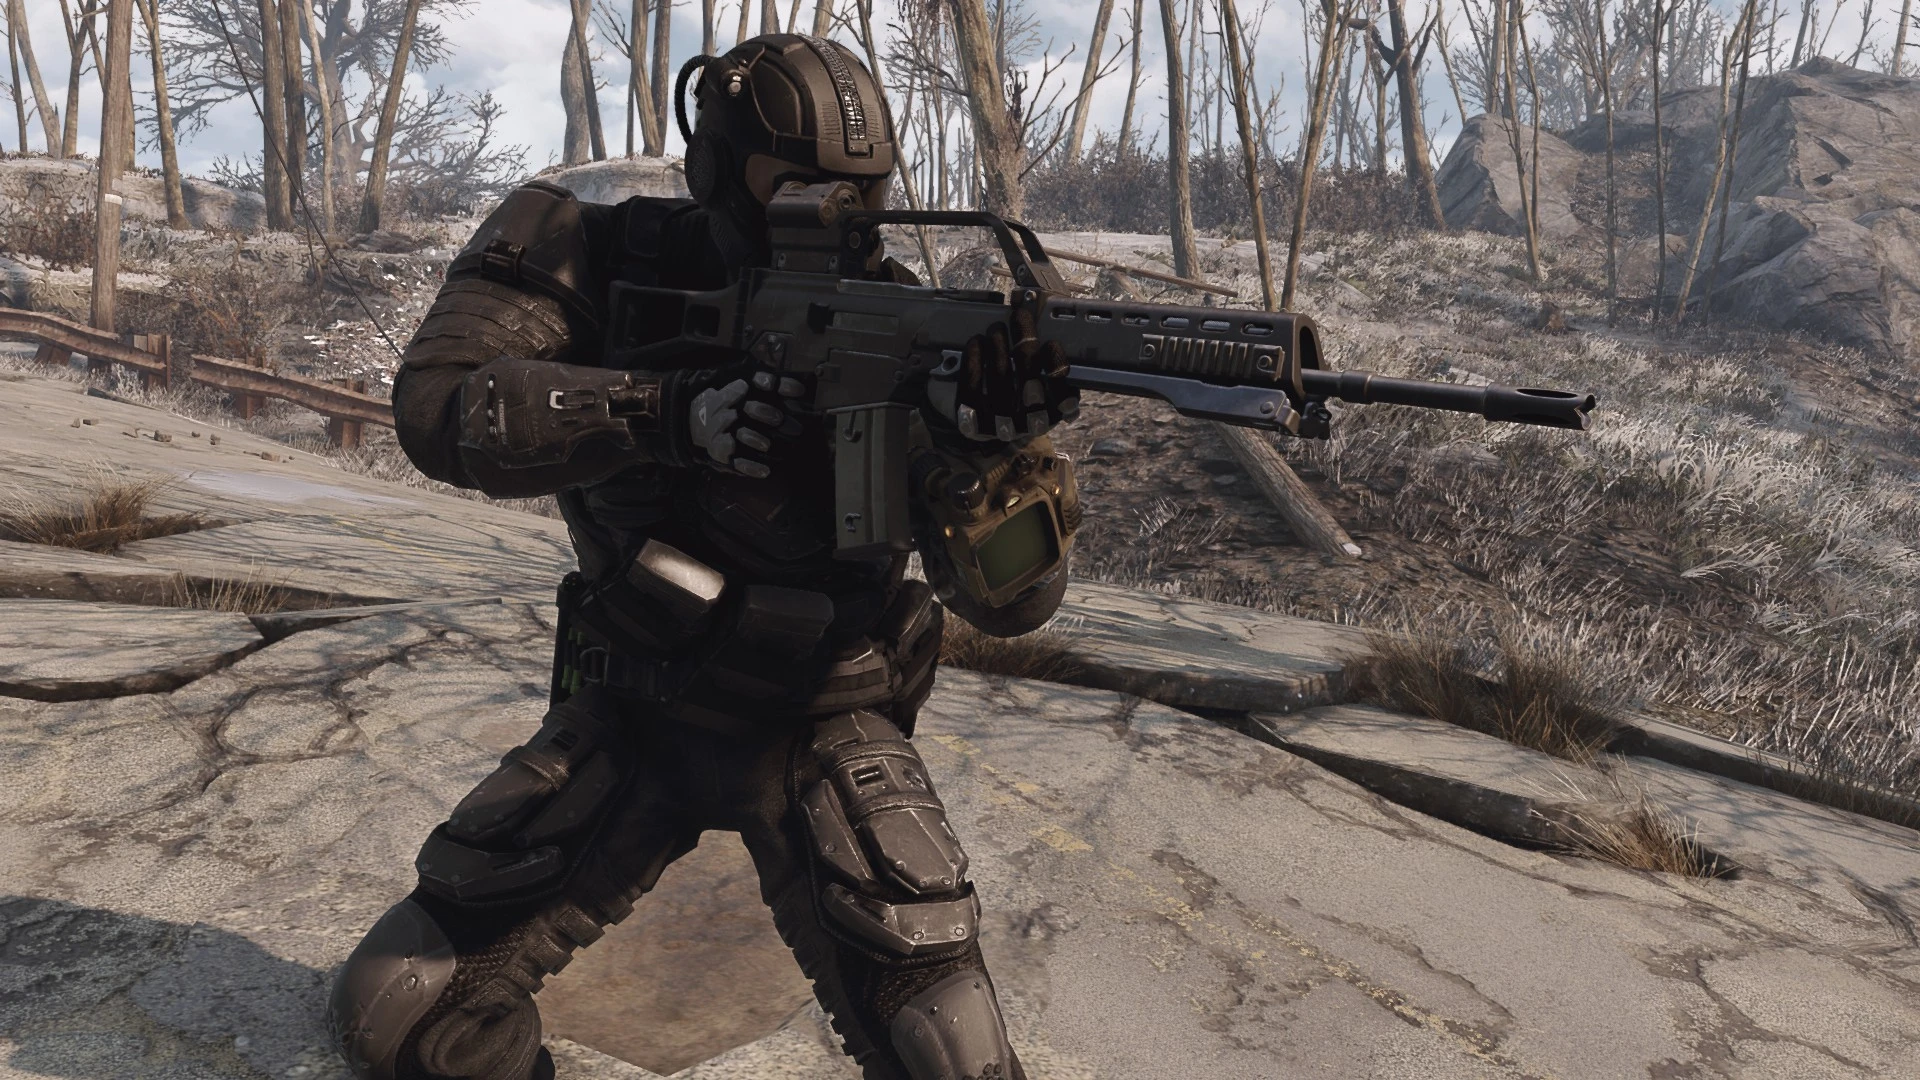 Holstered weapons fallout 4 фото 25